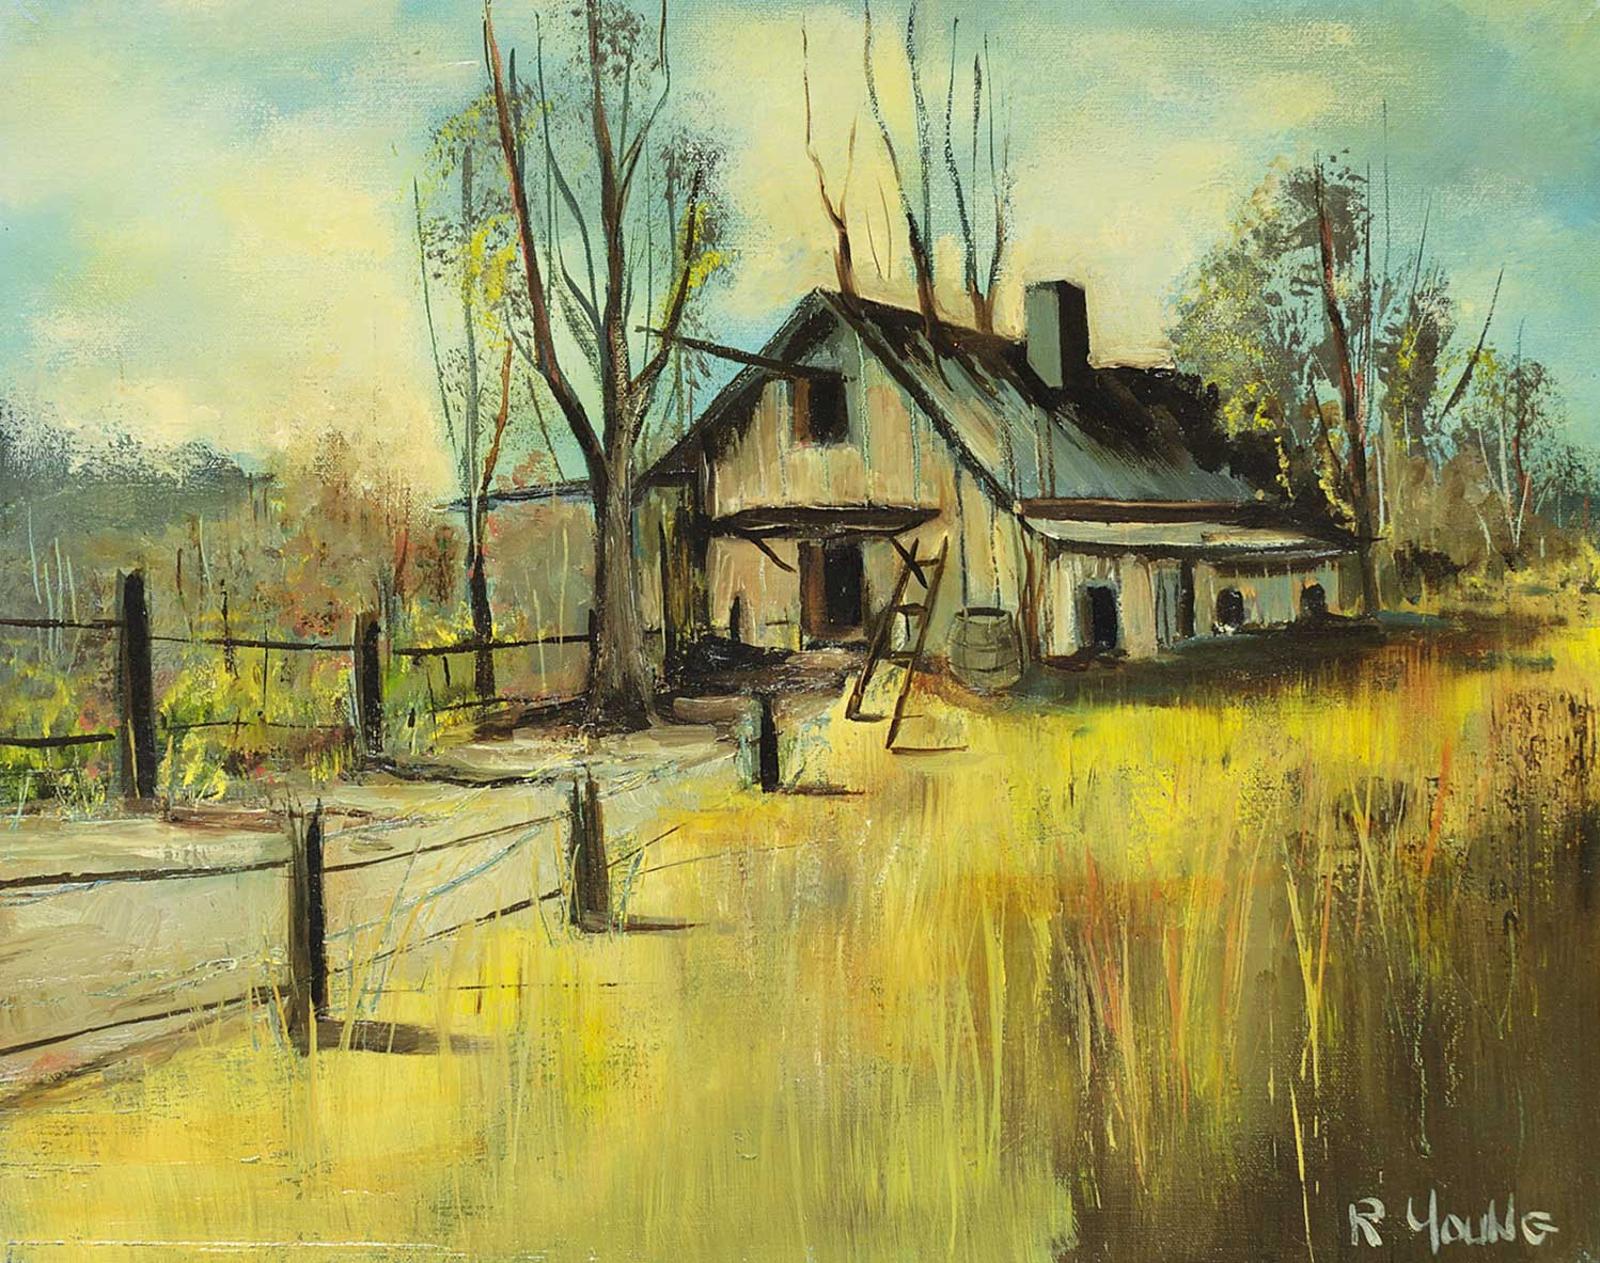 R. Young - Untitled - The Old Barn